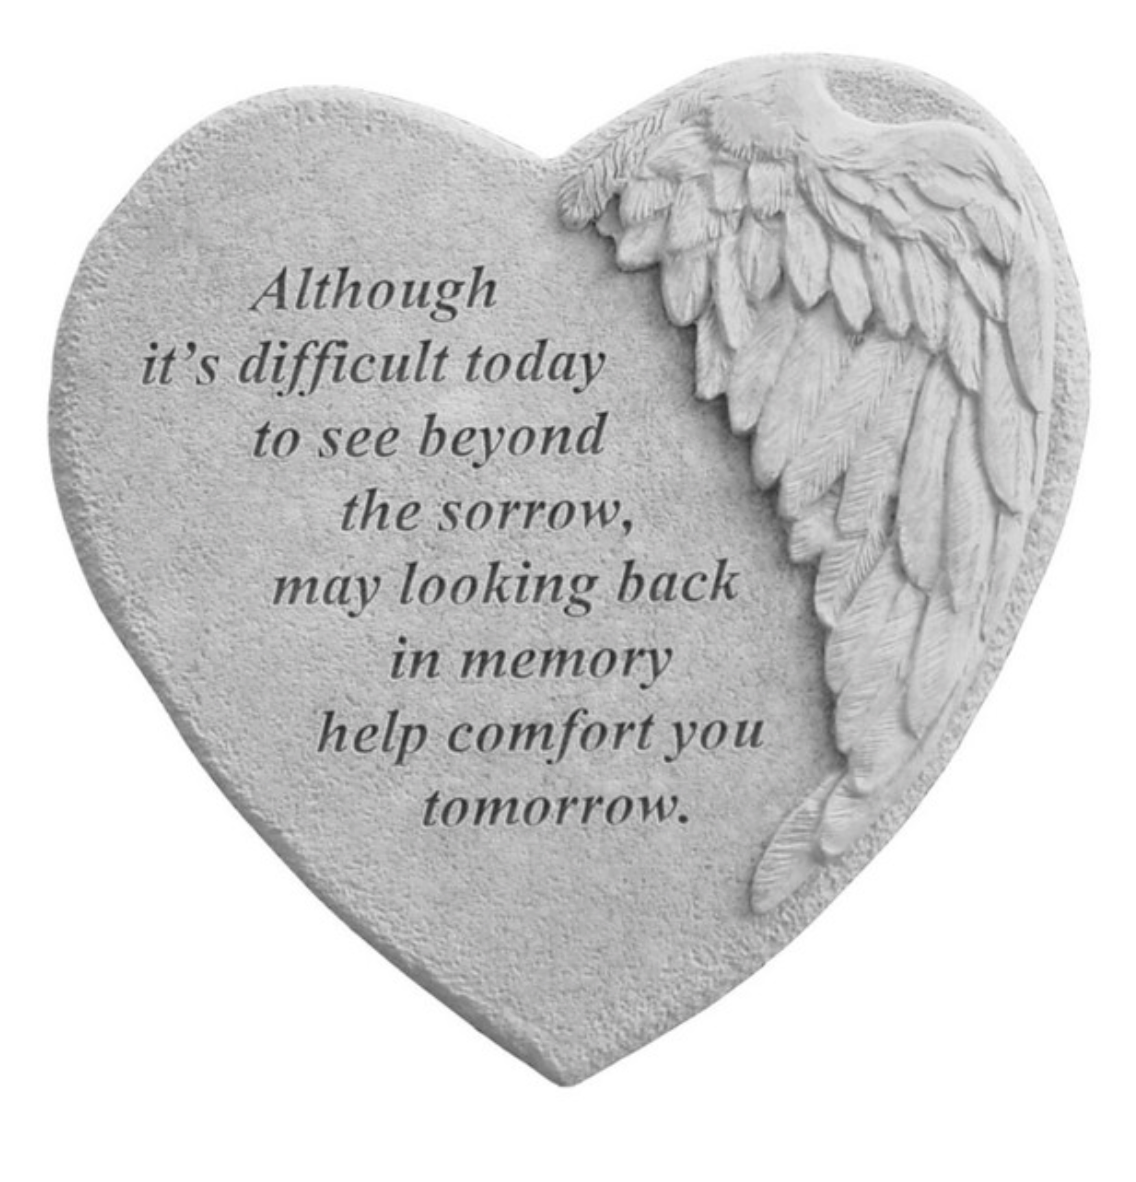 Large 23cm Memorial Heart Stone with Wing - Although it's difficult today